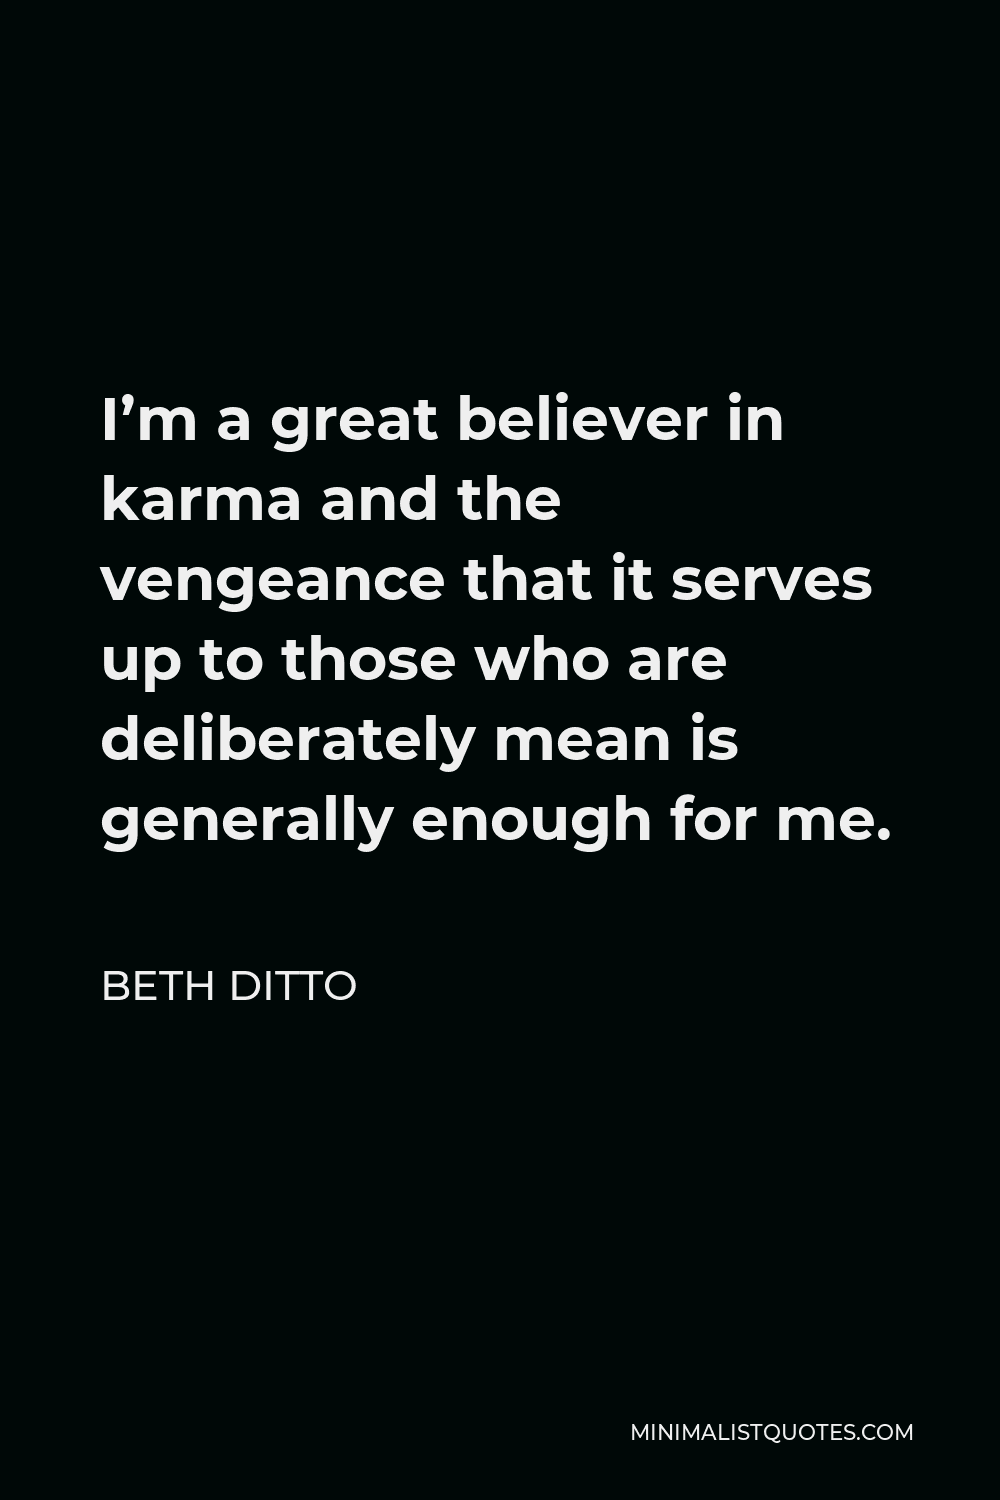 Beth Ditto Quote - I’m a great believer in karma and the vengeance that it serves up to those who are deliberately mean is generally enough for me.